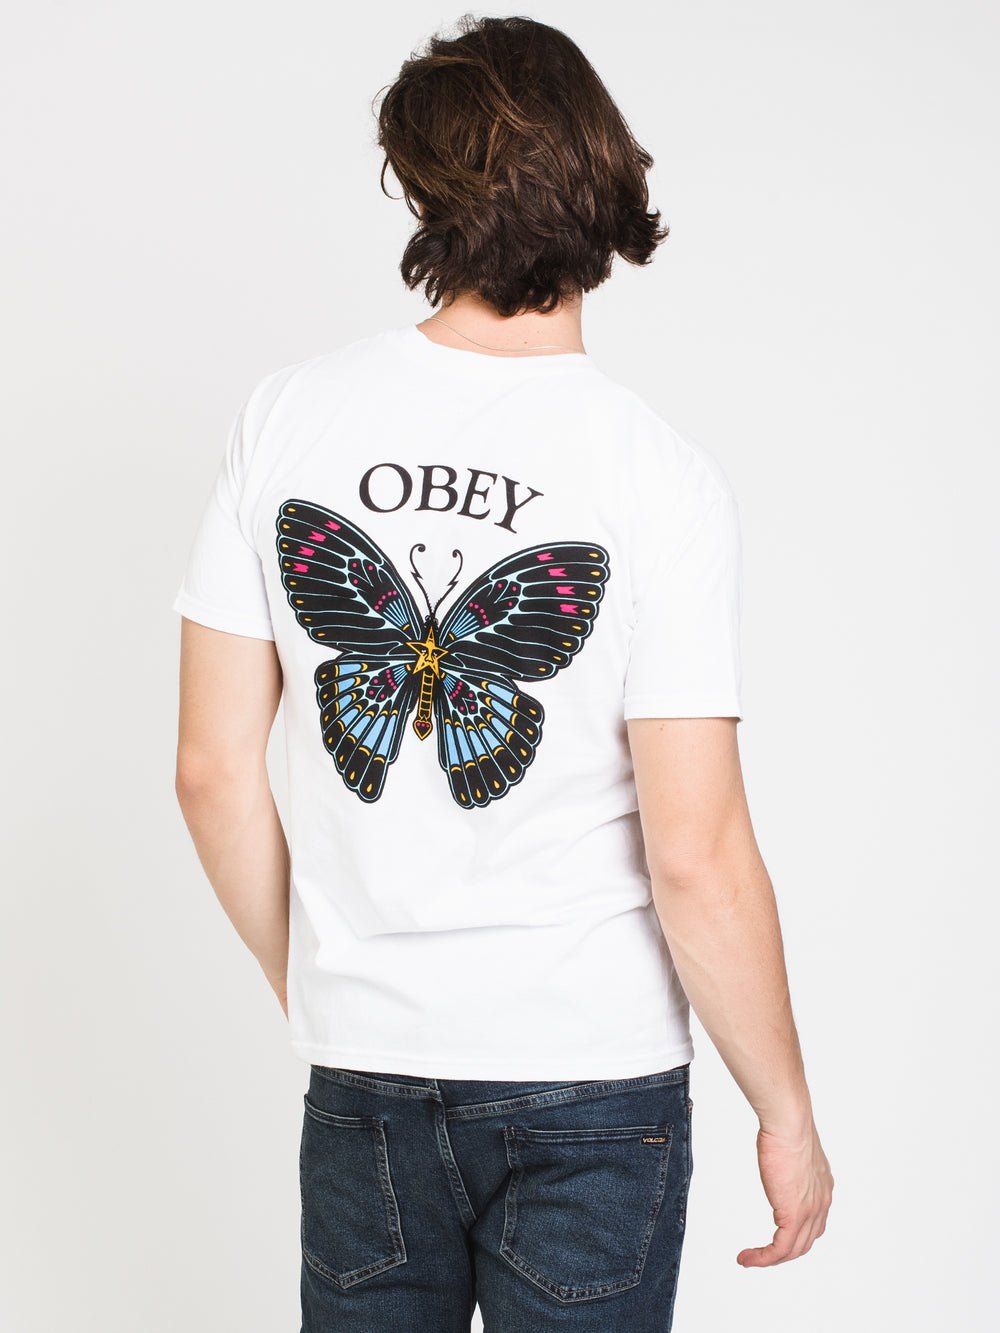 T-SHIRT OBEY FLY AWAY - LIQUIDATION